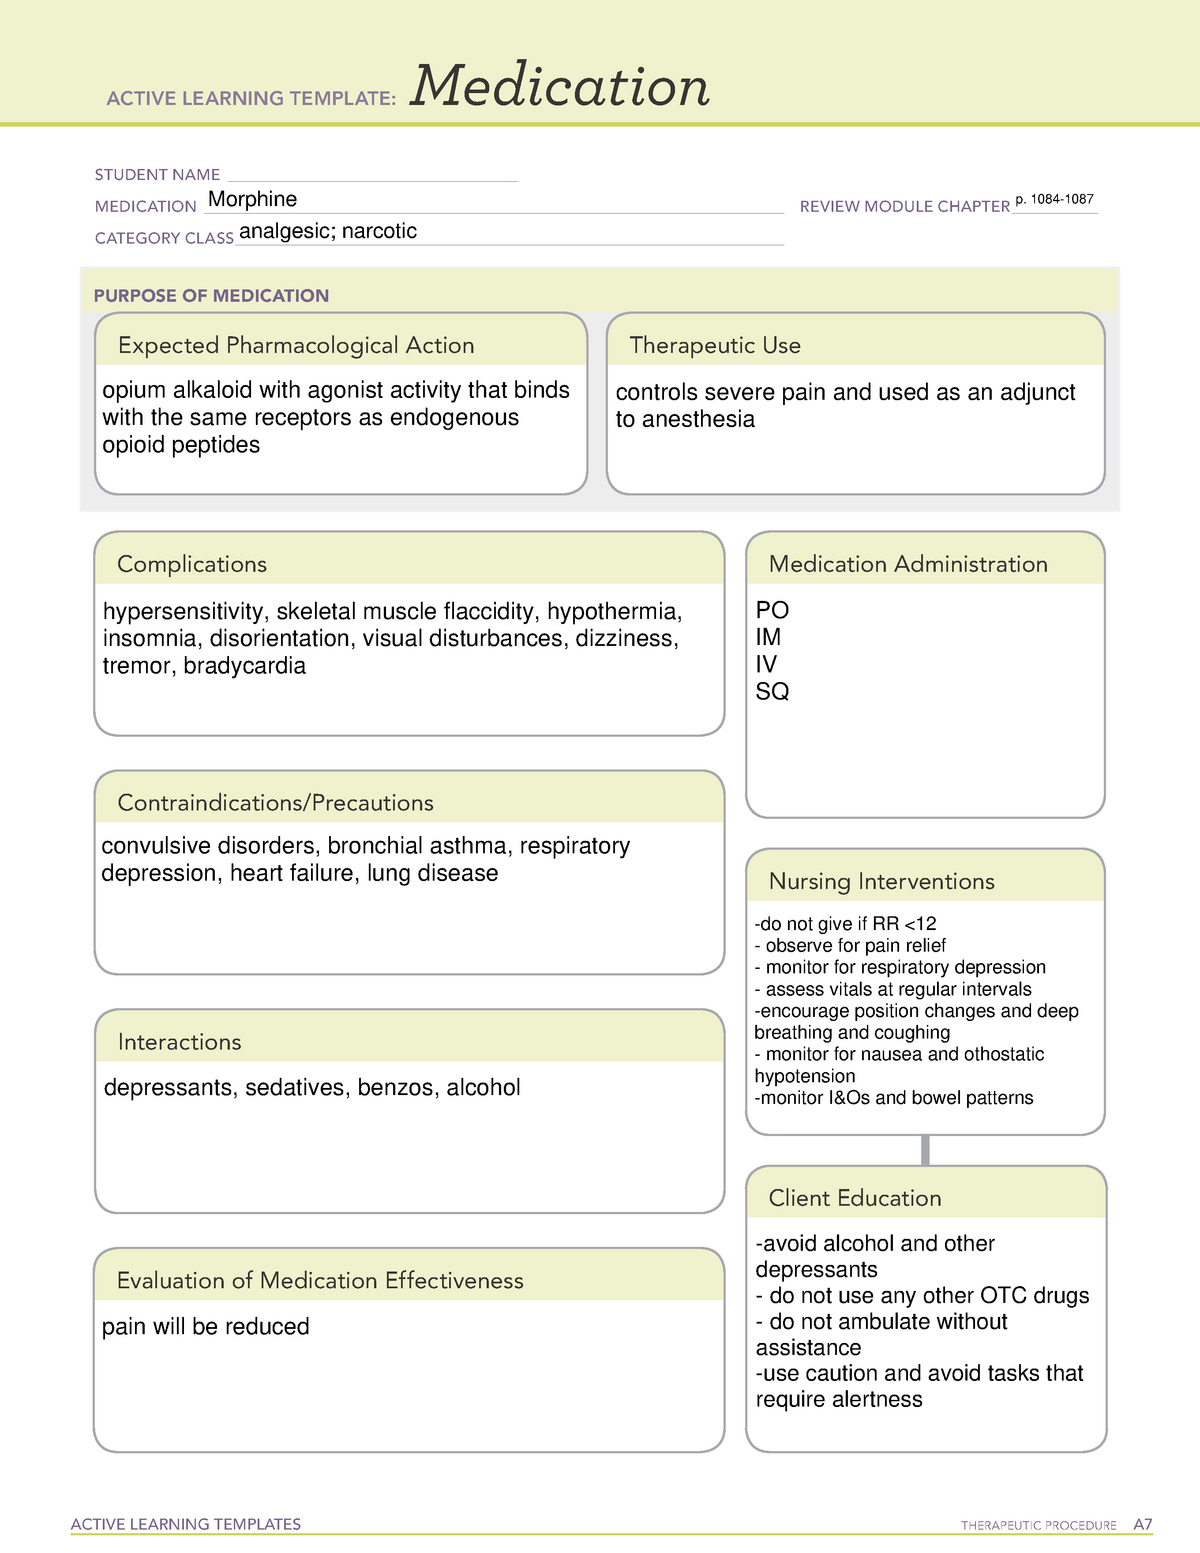 Morphine medication ATI template ACTIVE LEARNING TEMPLATES